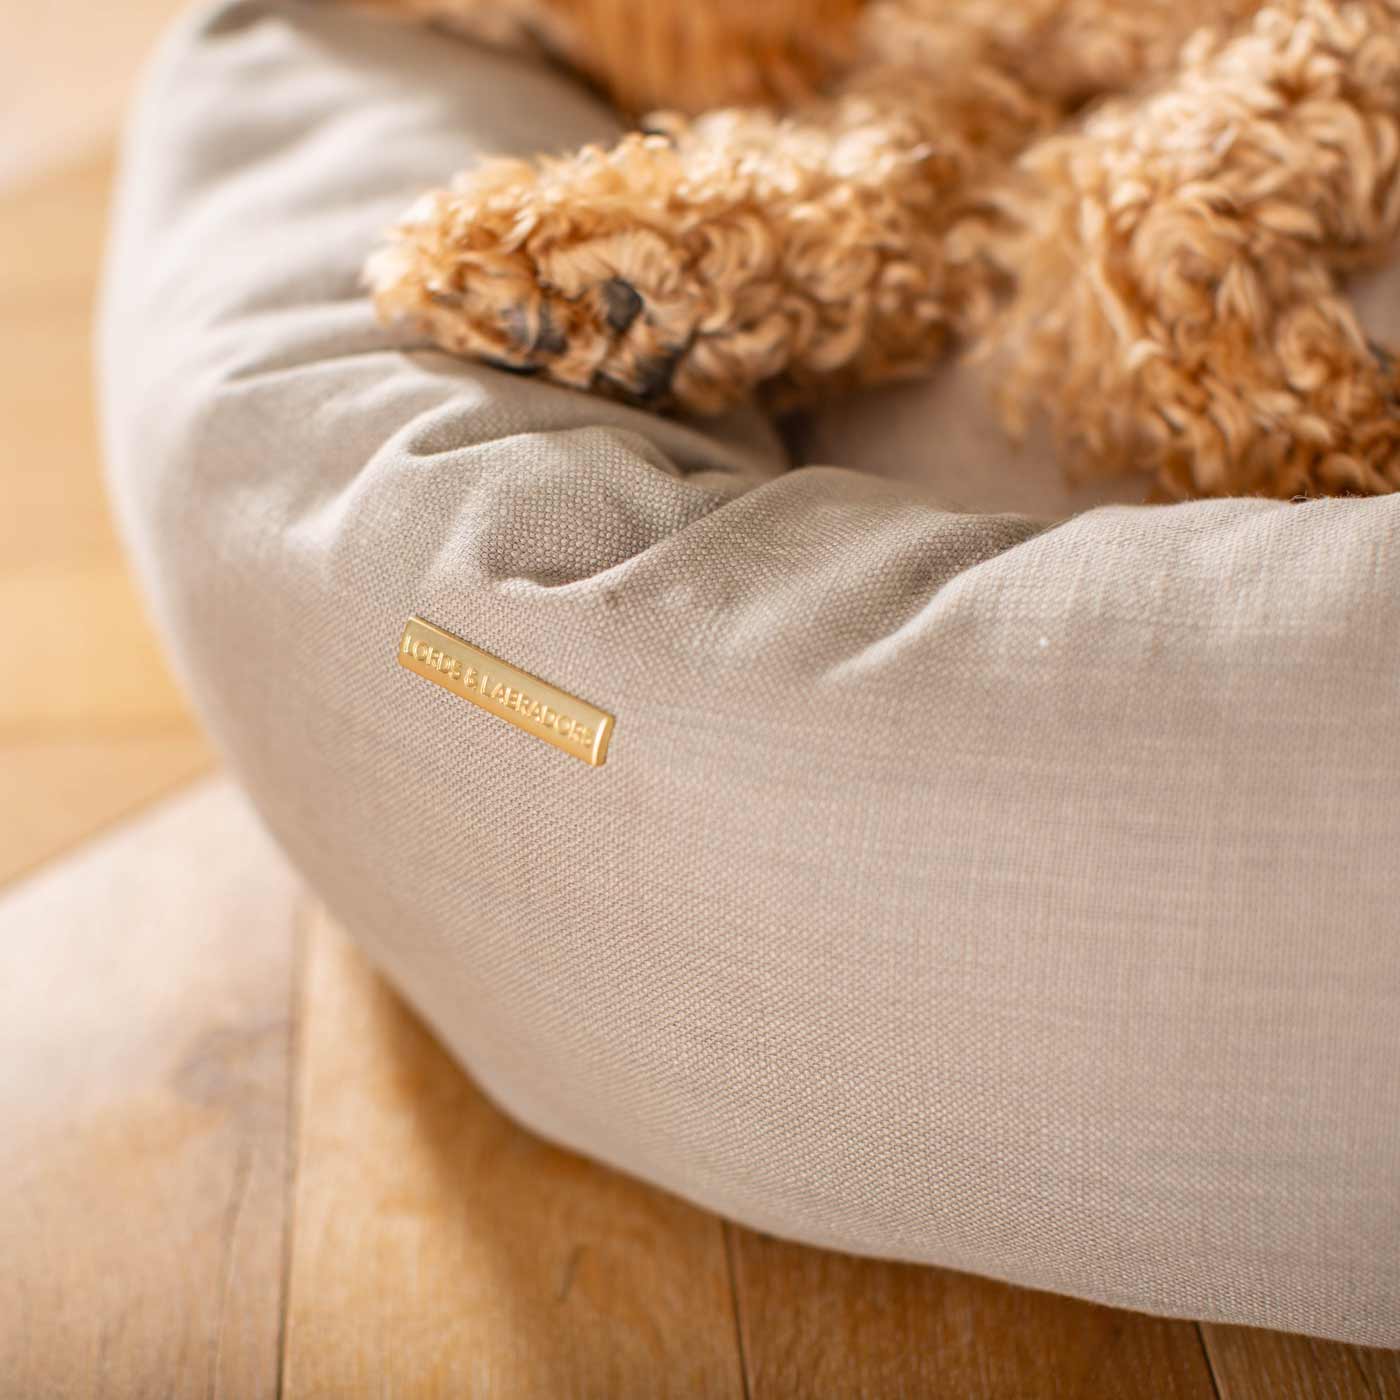 Discover Our Handmade Luxury Donut Dog Bed, In Savanna Stone, The Perfect Choice For Puppies Available Now at Lords & Labradors